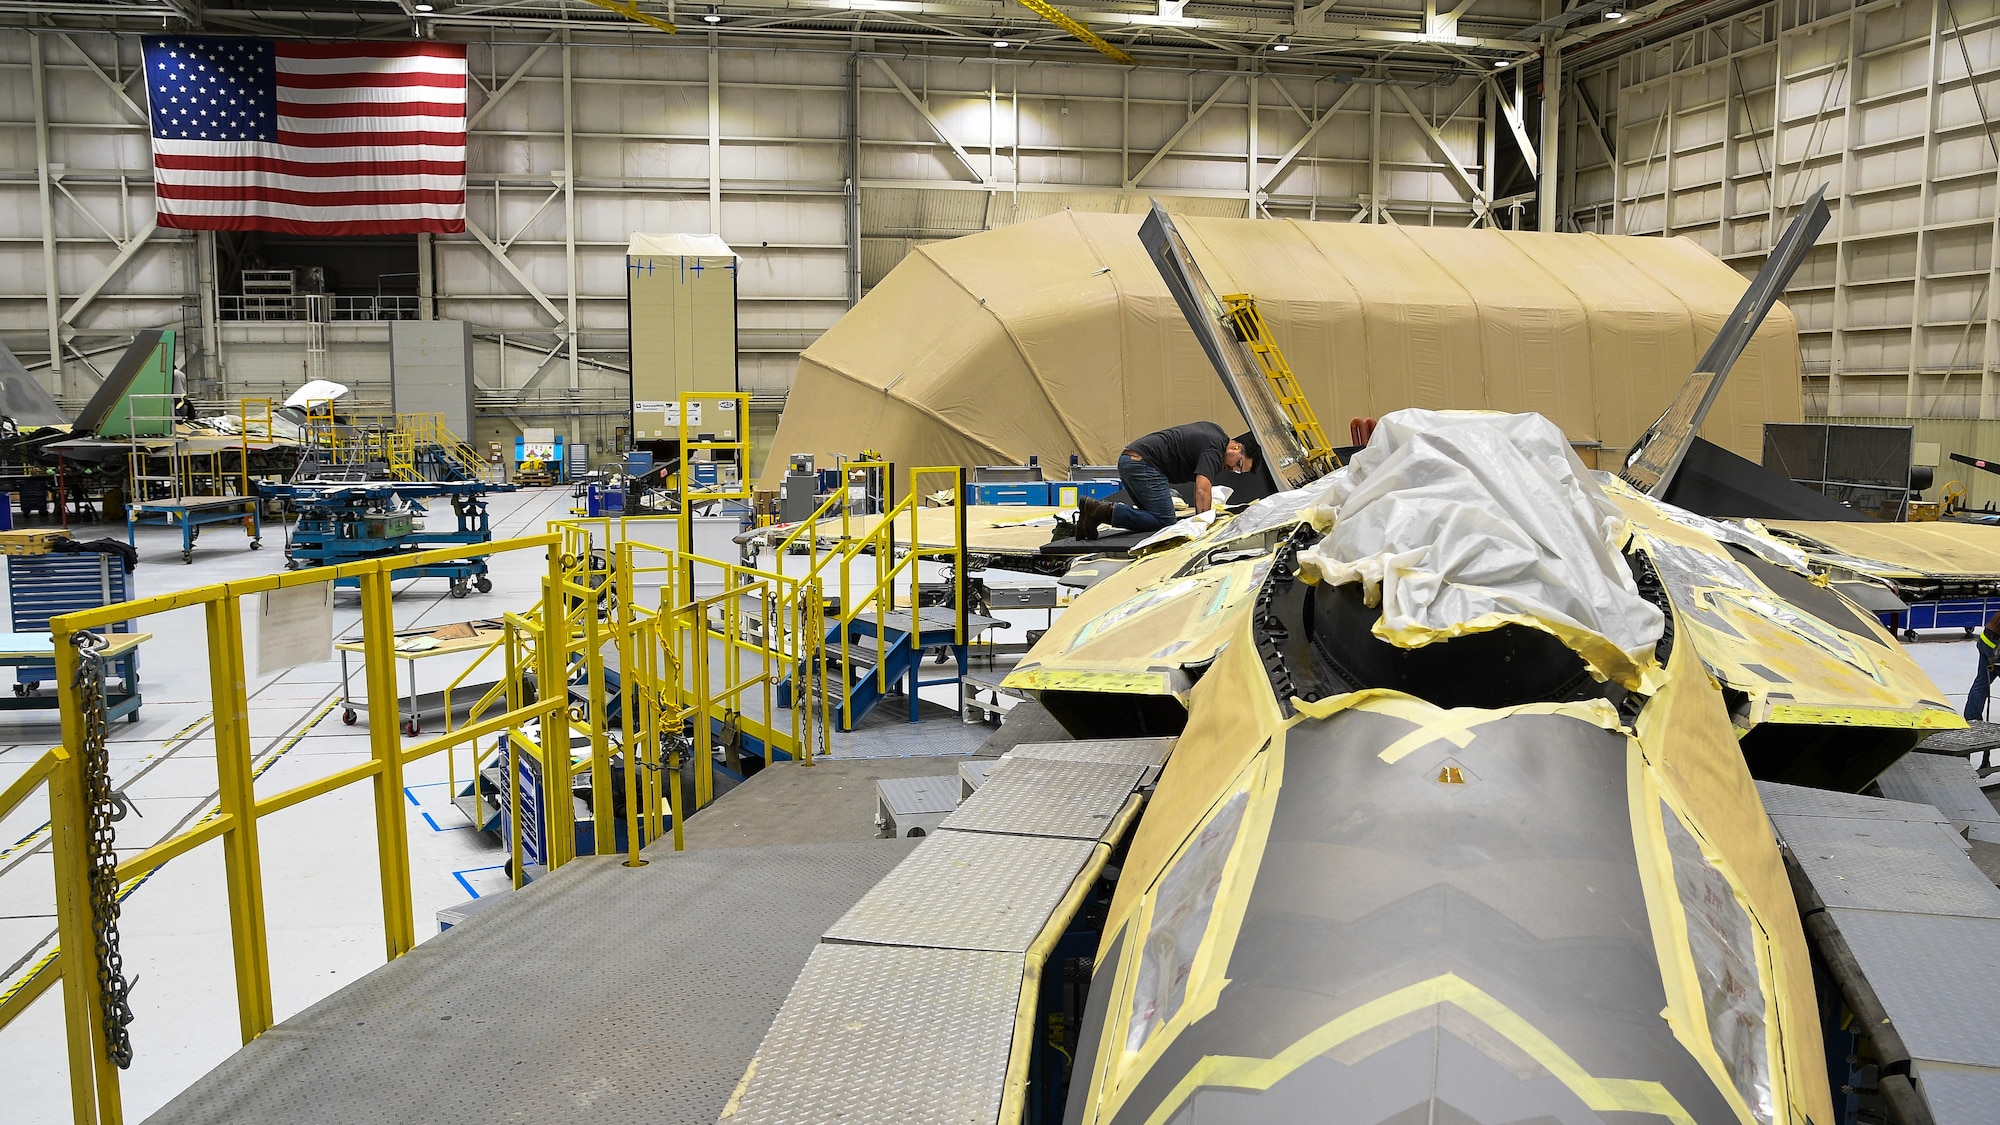 The 574th installed the first metallic 3D printed part on an operational F-22 in December 2018.